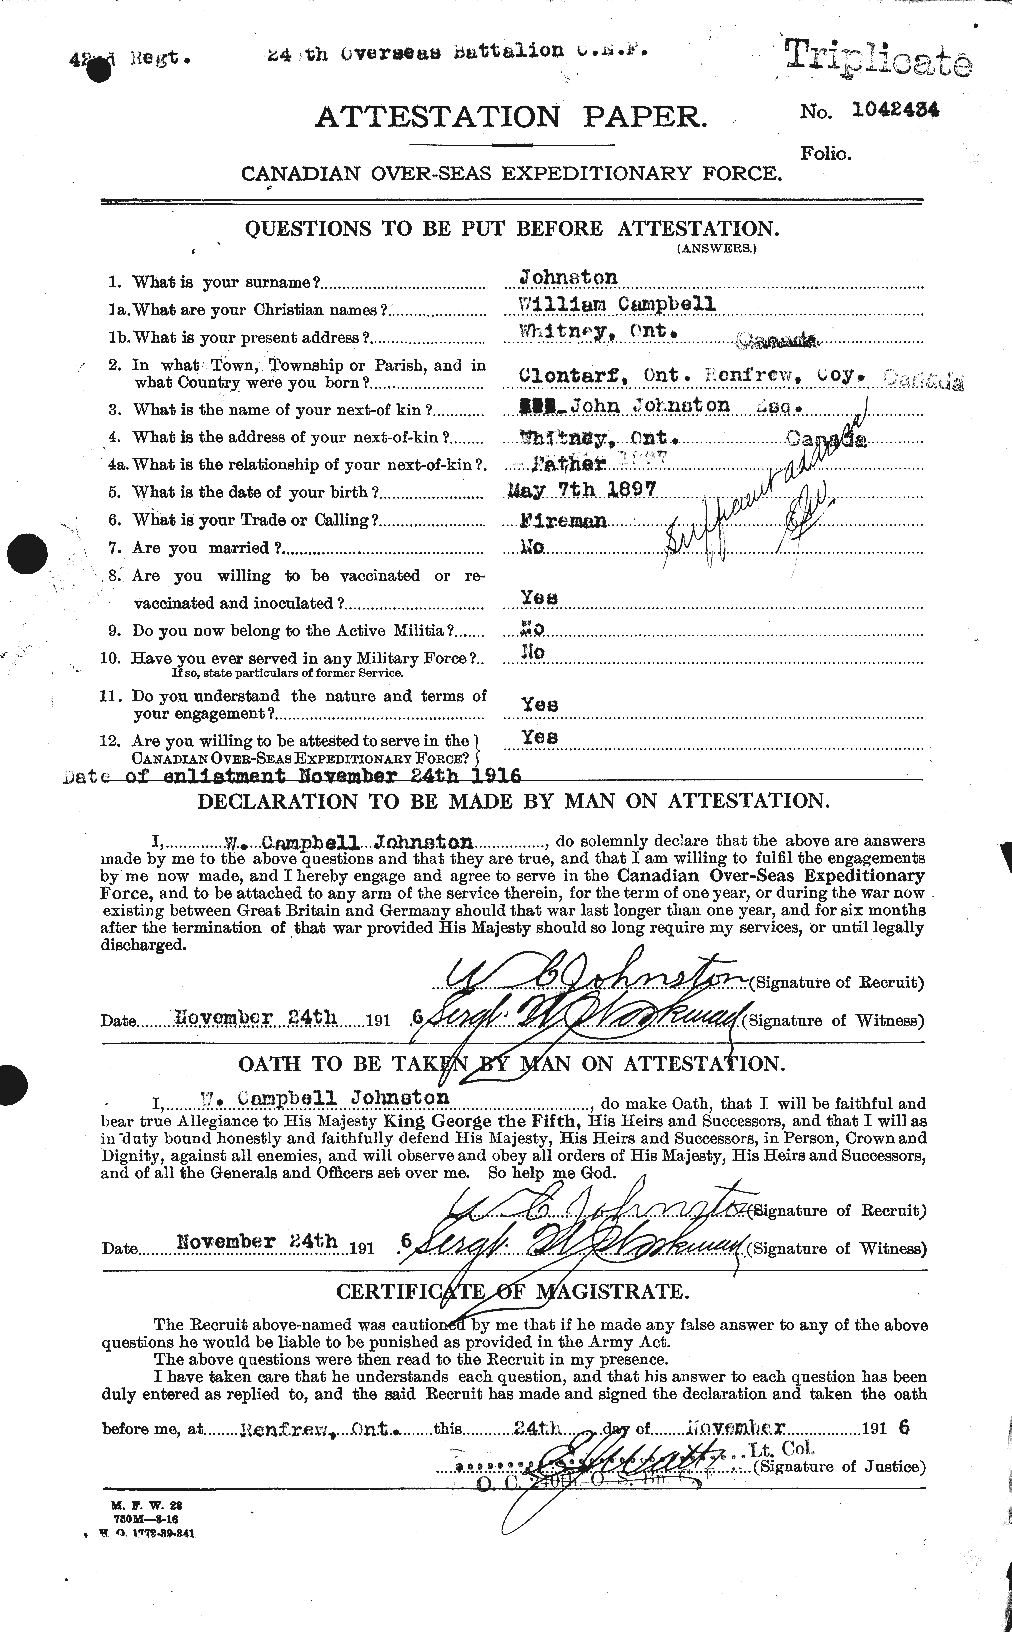 Personnel Records of the First World War - CEF 427307a